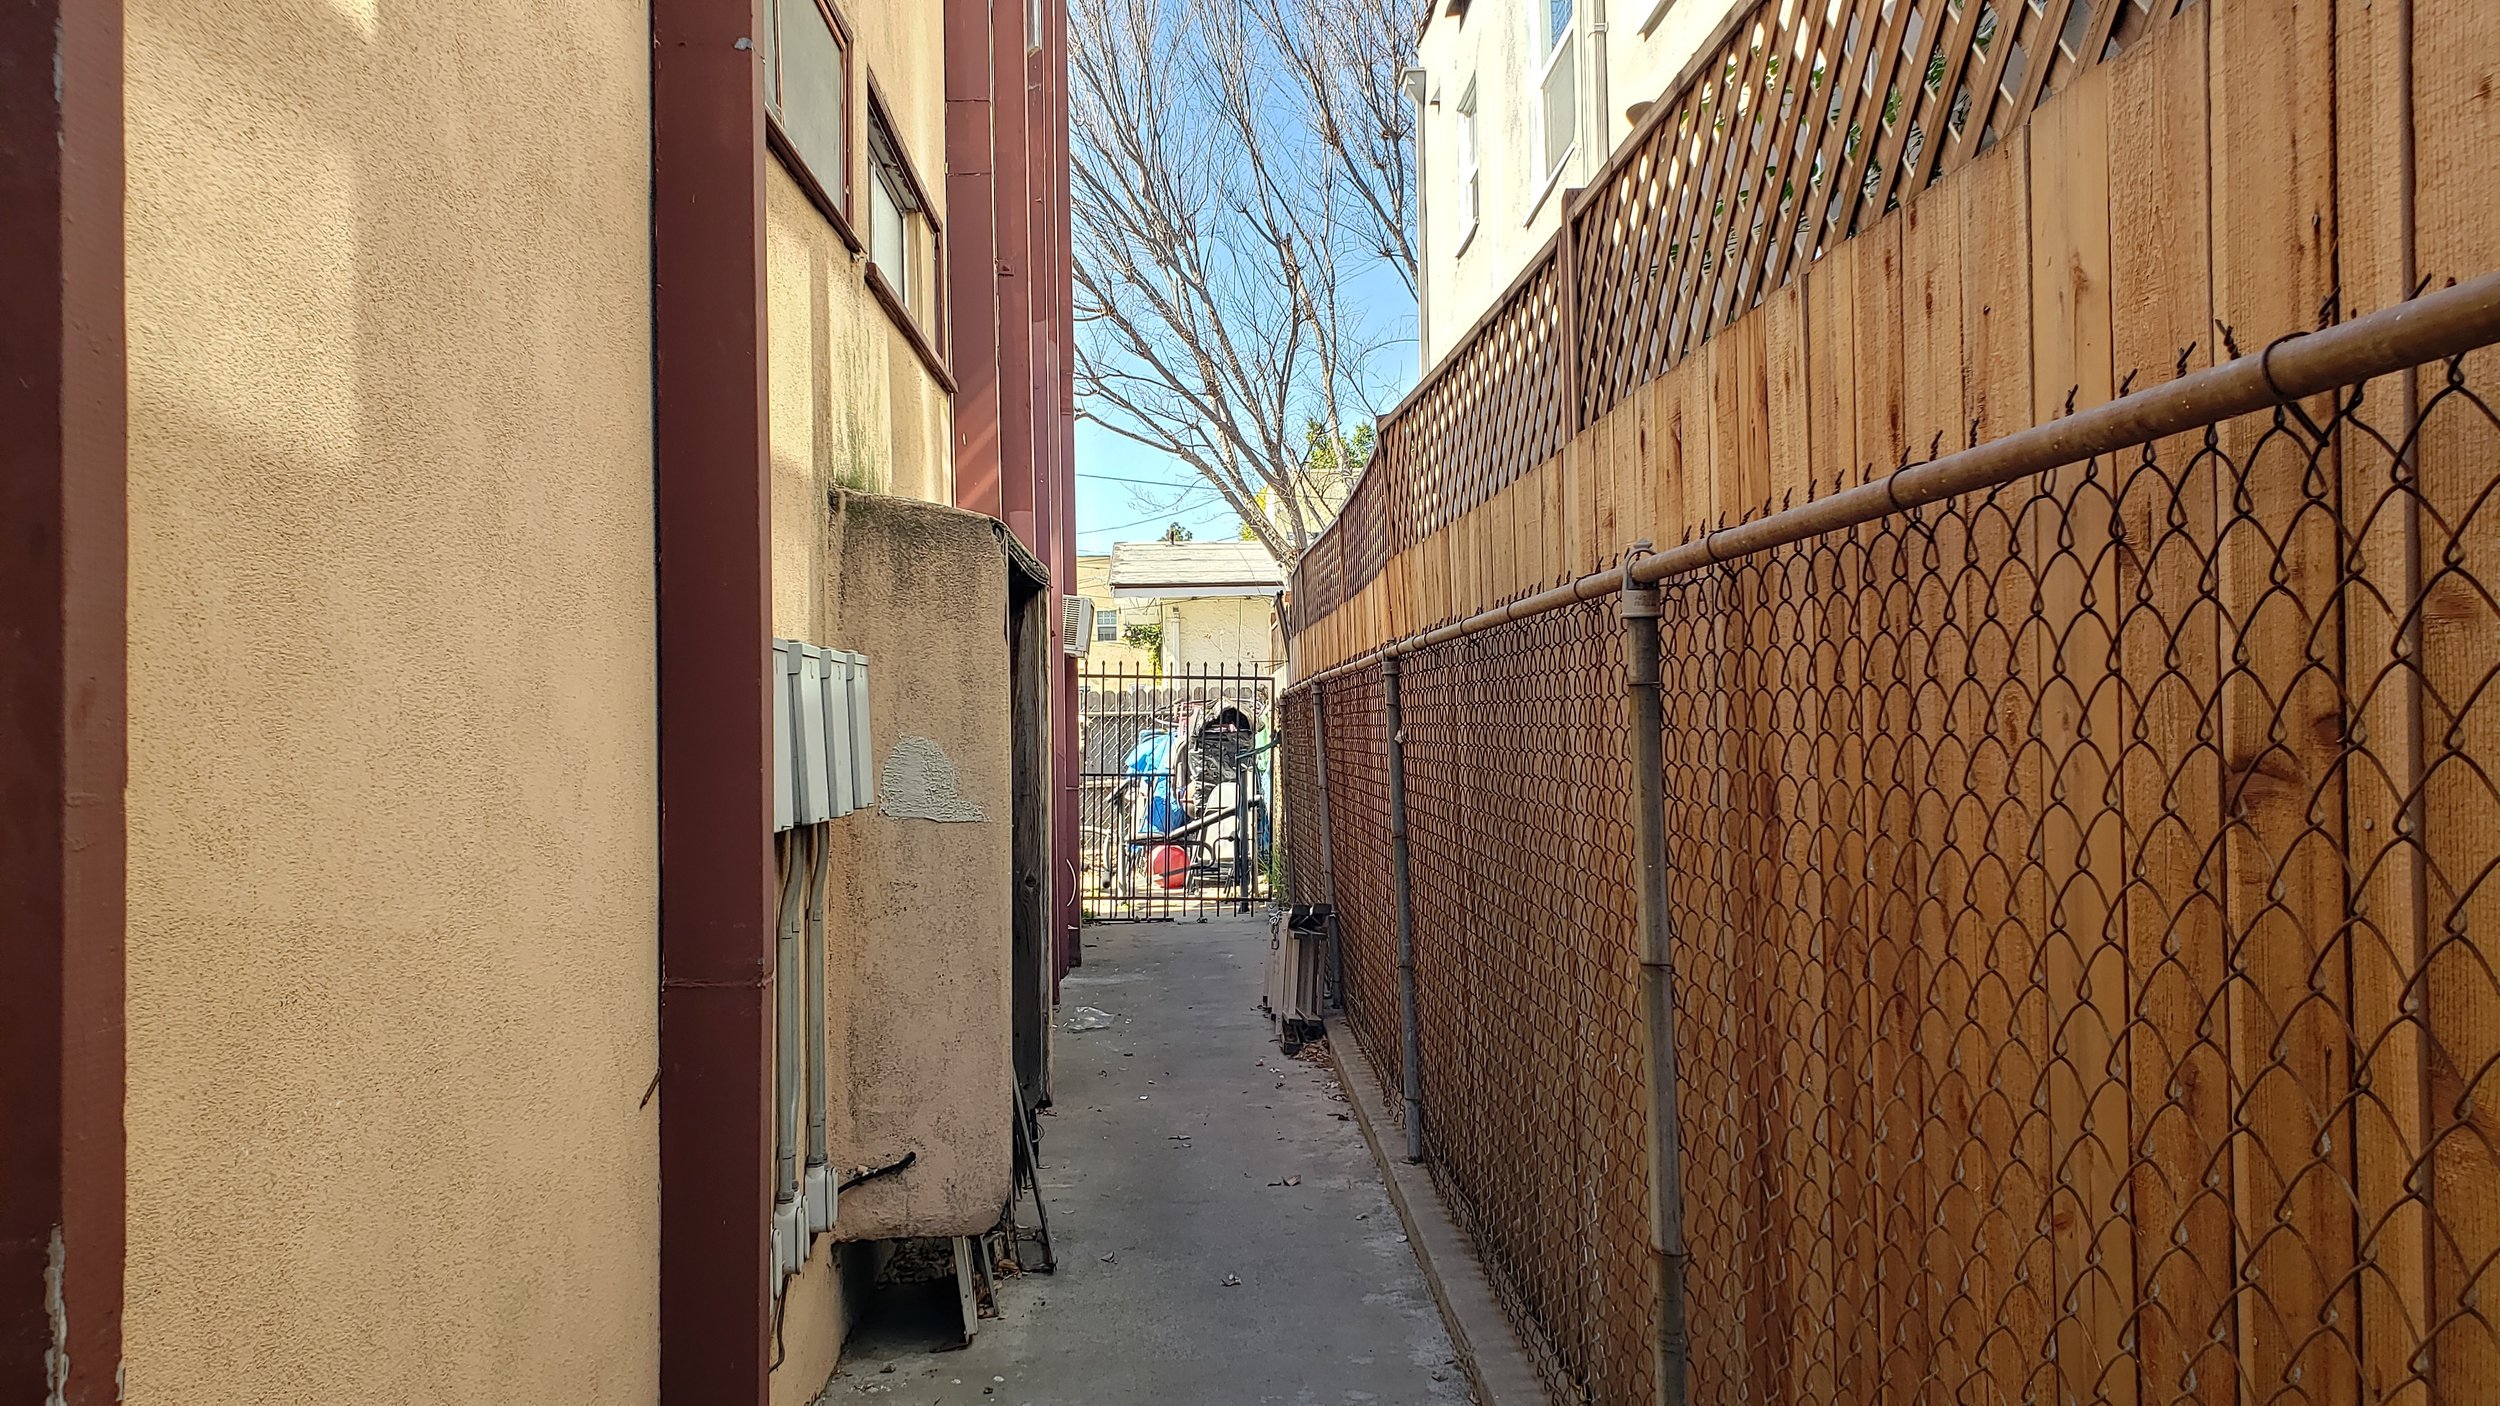 Narrow alley with chain-link fence and rear view of residential buildings.